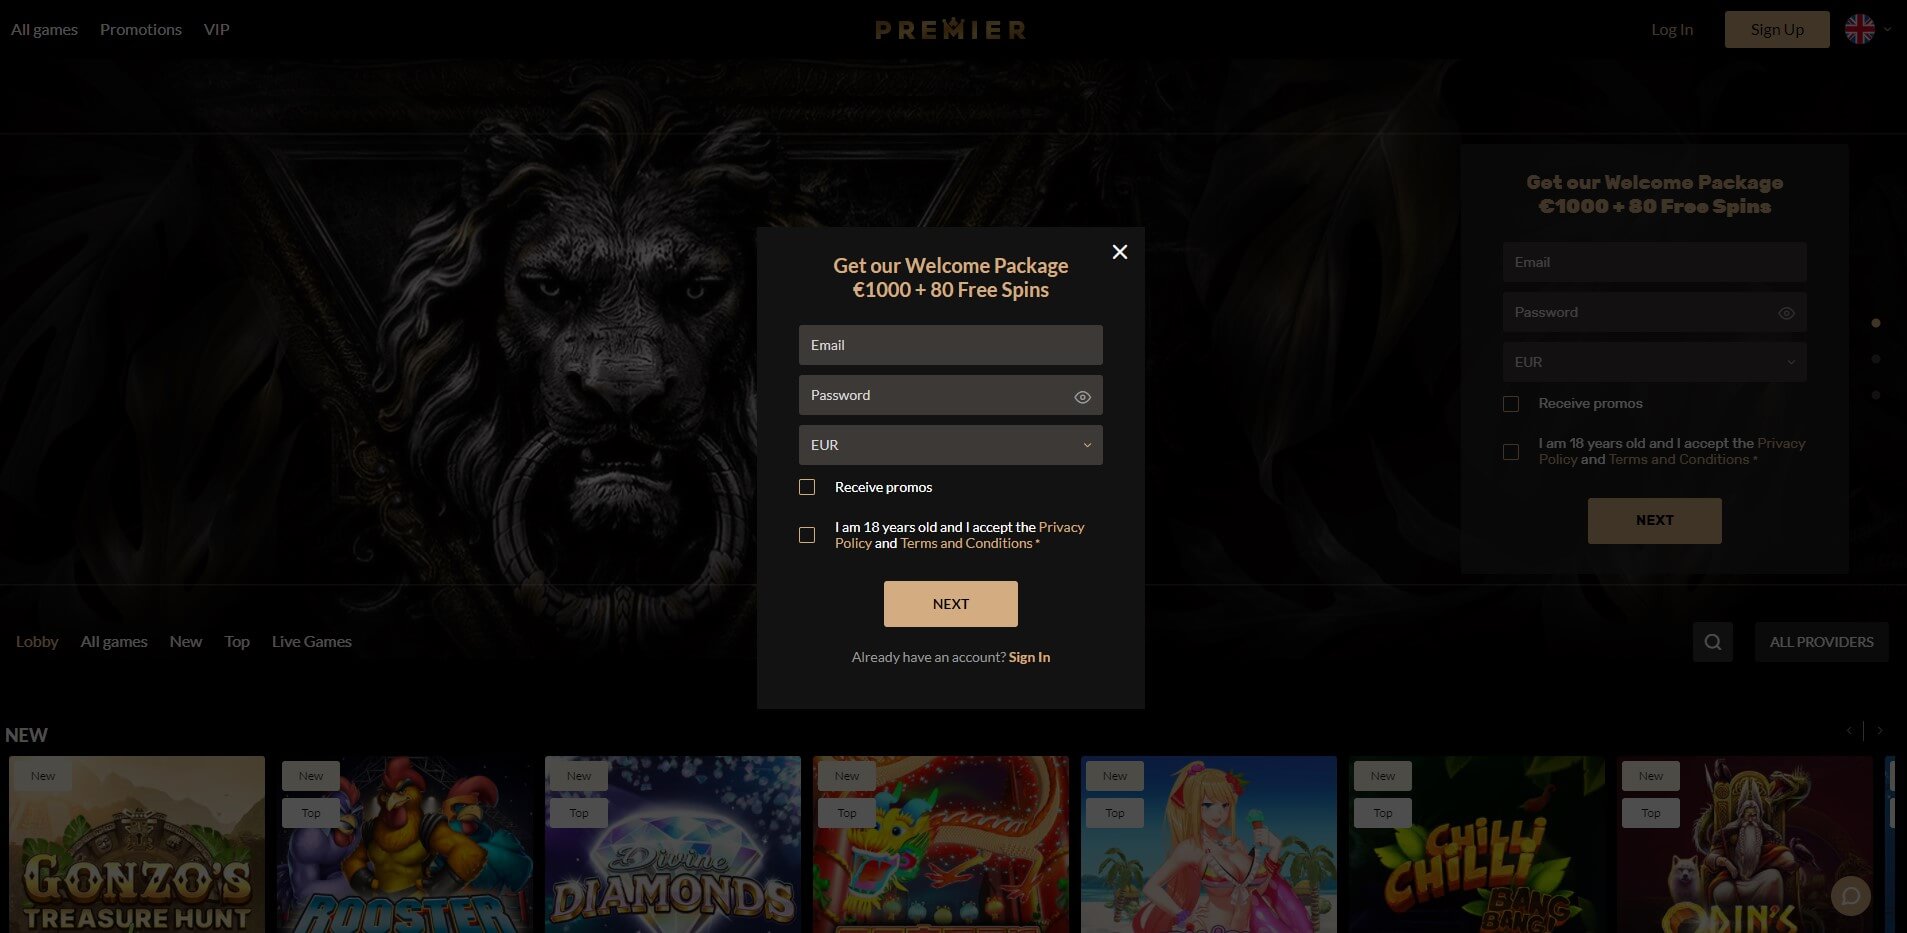 Sign Up at Premier Casino